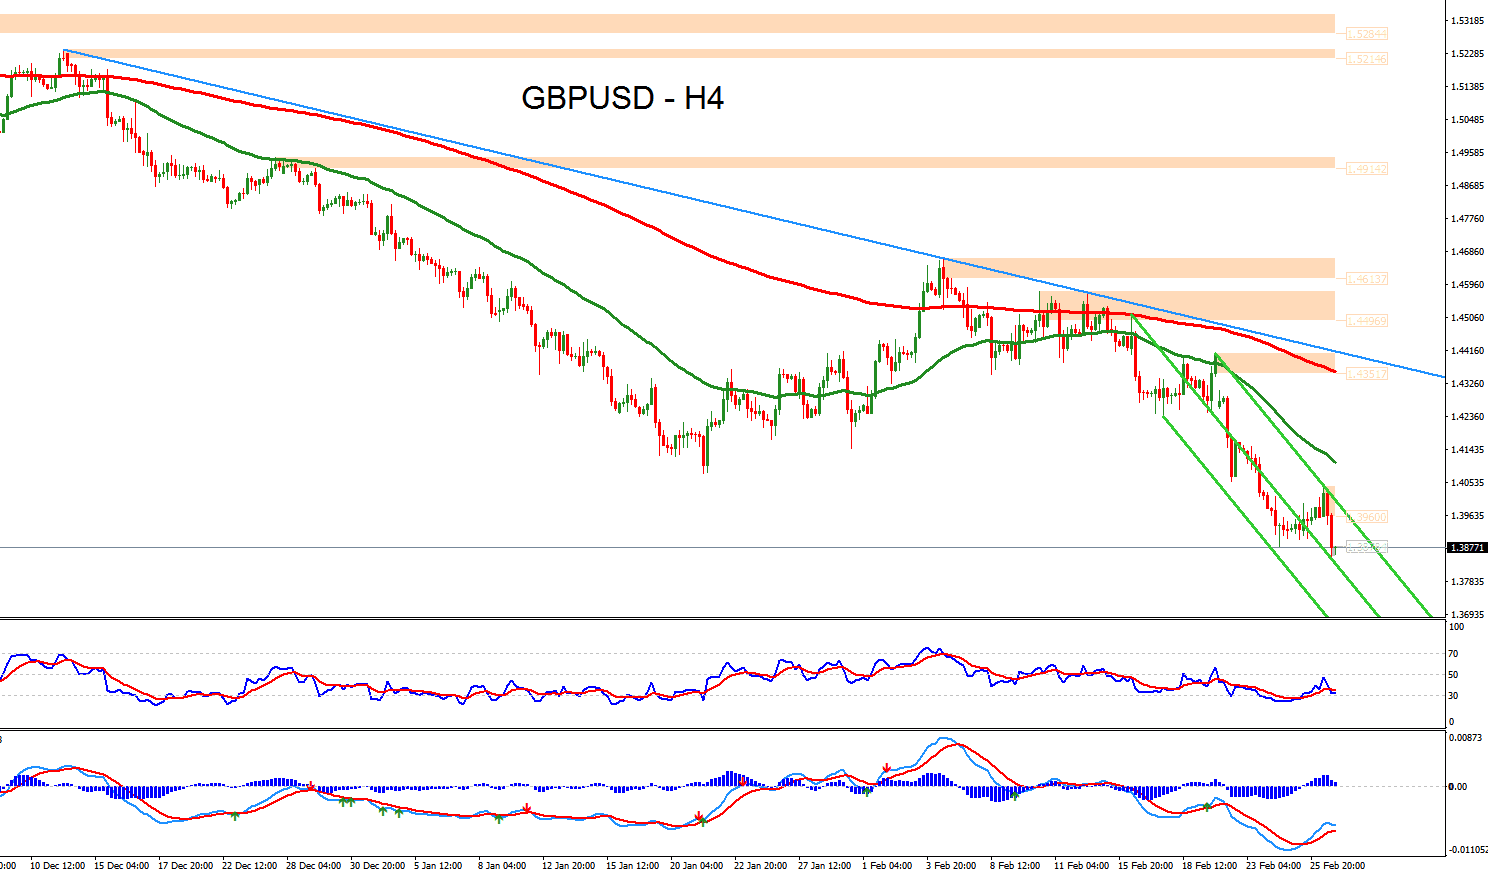 Forex Technical Analysis of GBPUSD for February 29, 2016 | Forex